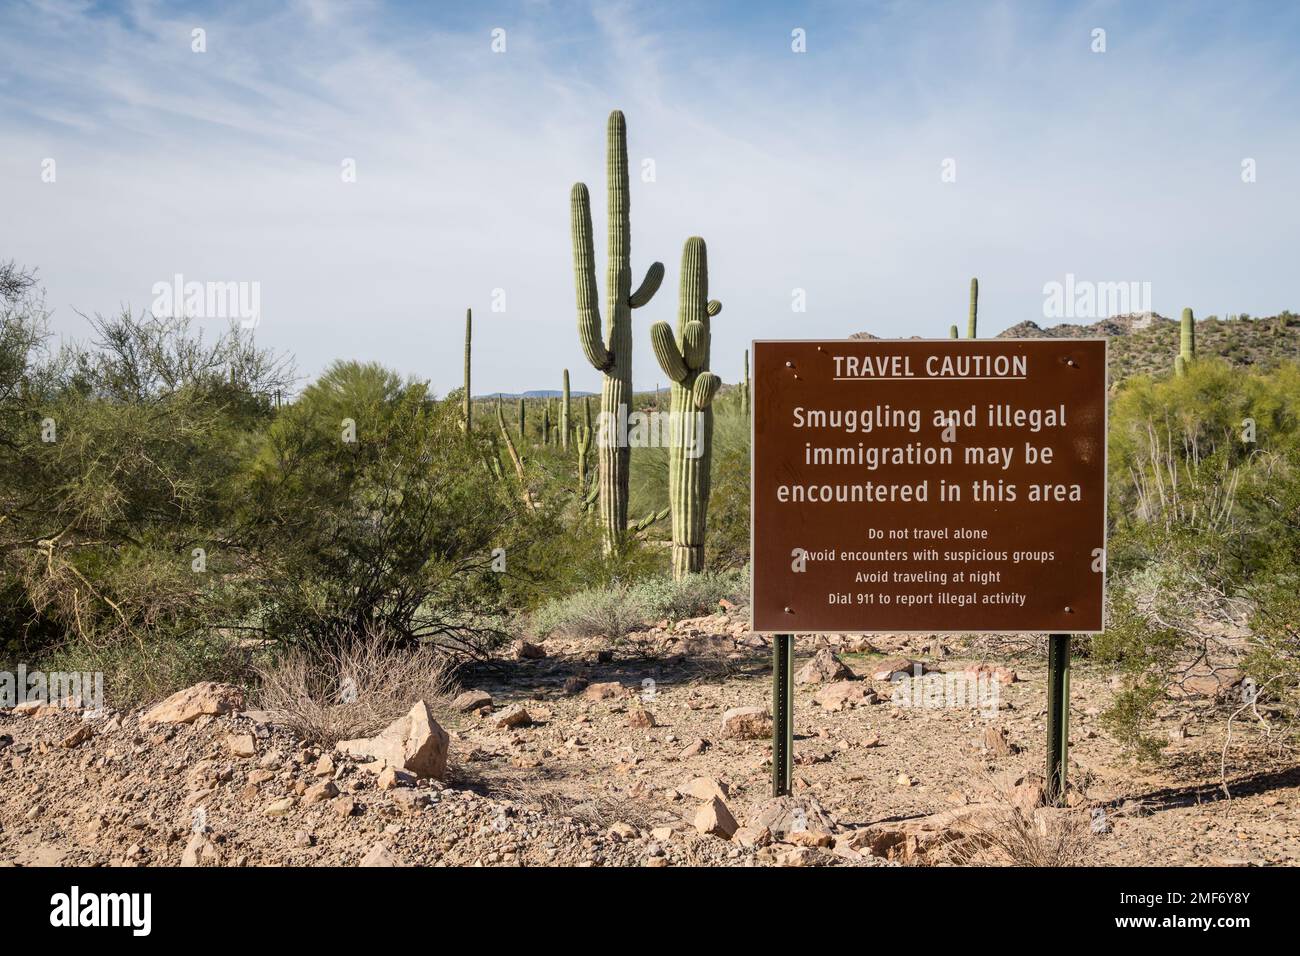 Sign near US - Mexican border wall reading Caution smuggling and illegal immigration in this area - Arizona Stock Photo